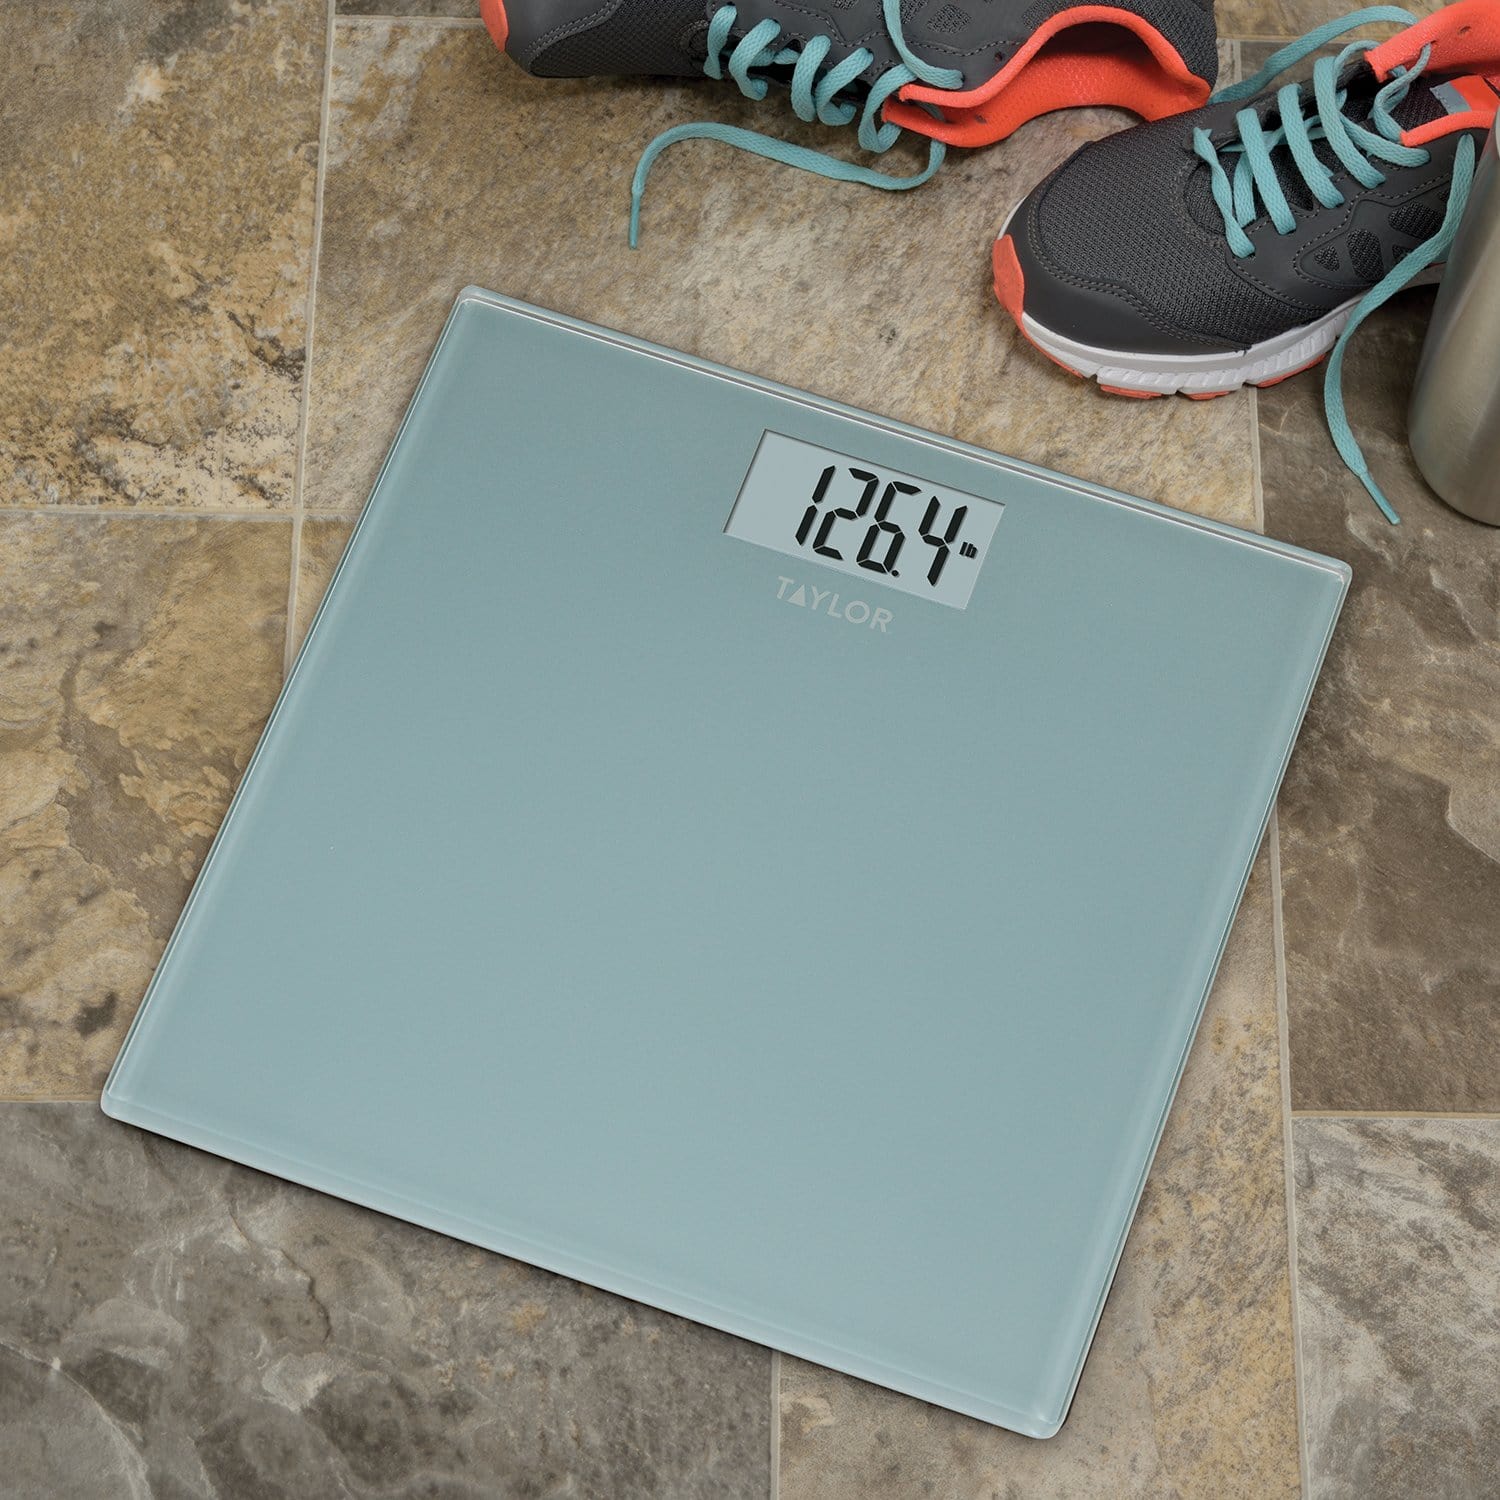 Stainless Steel/Glass Digital Bathroom Scale - PIA Products